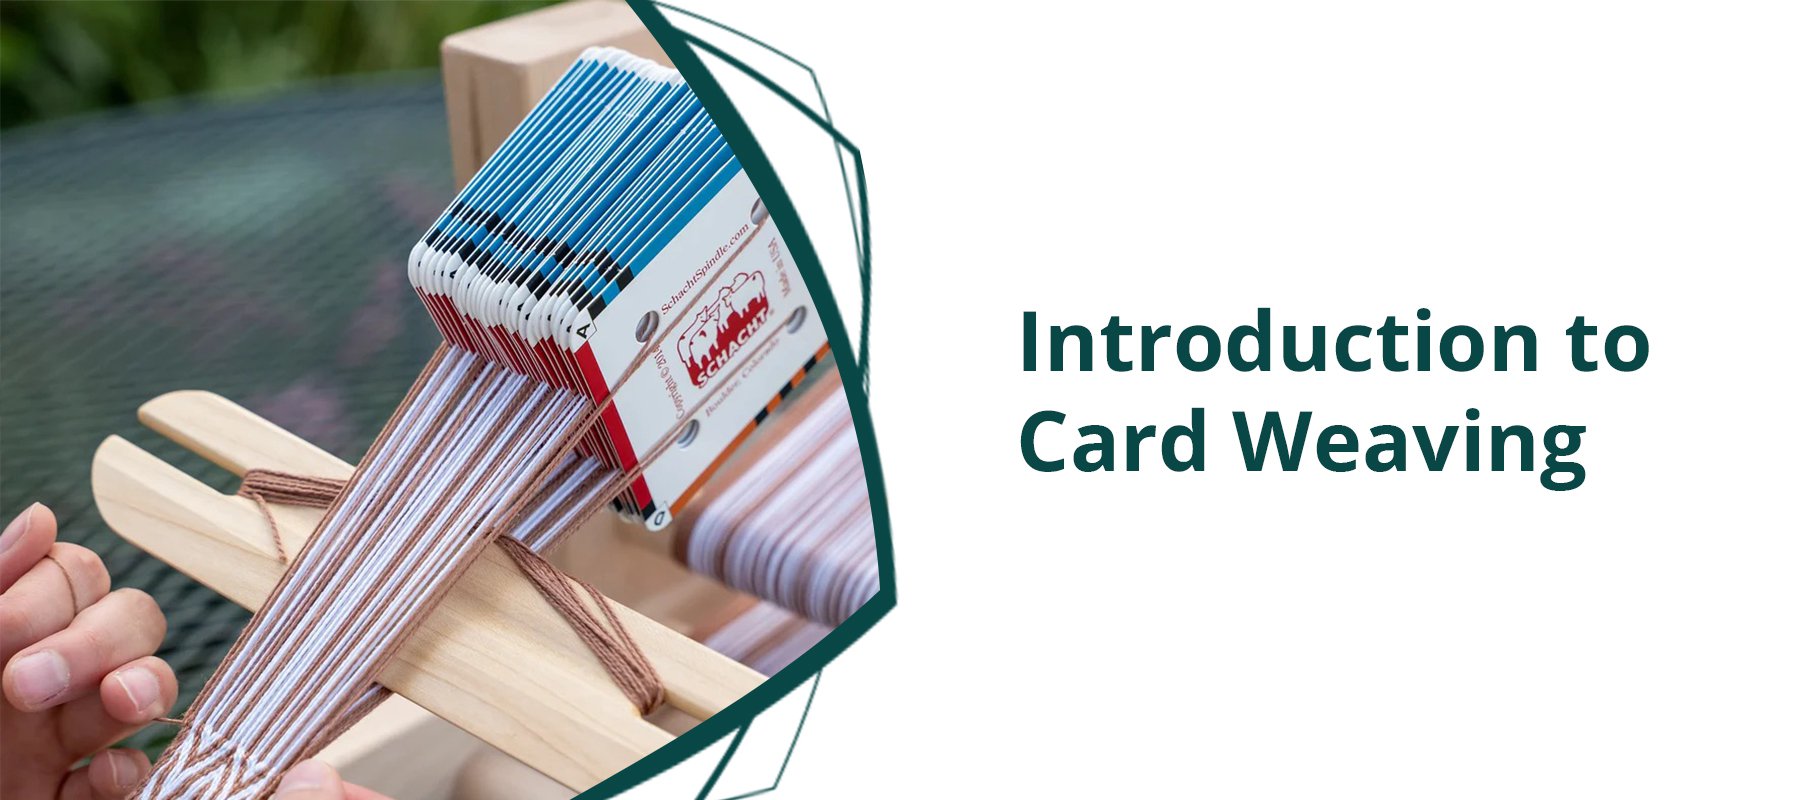 Introduction to Card Weaving